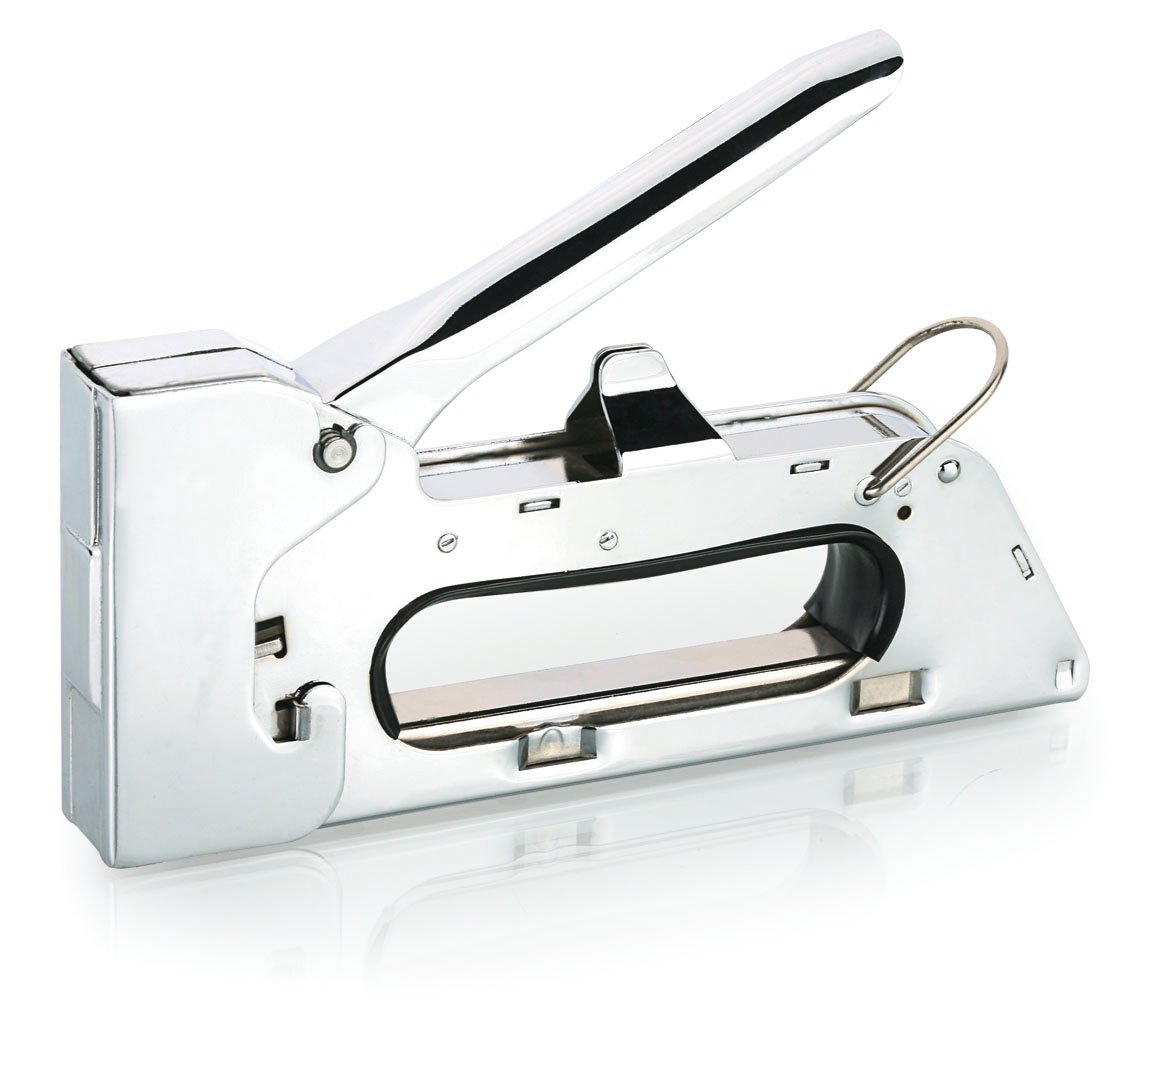 a white and black scissors are on top of a stapler